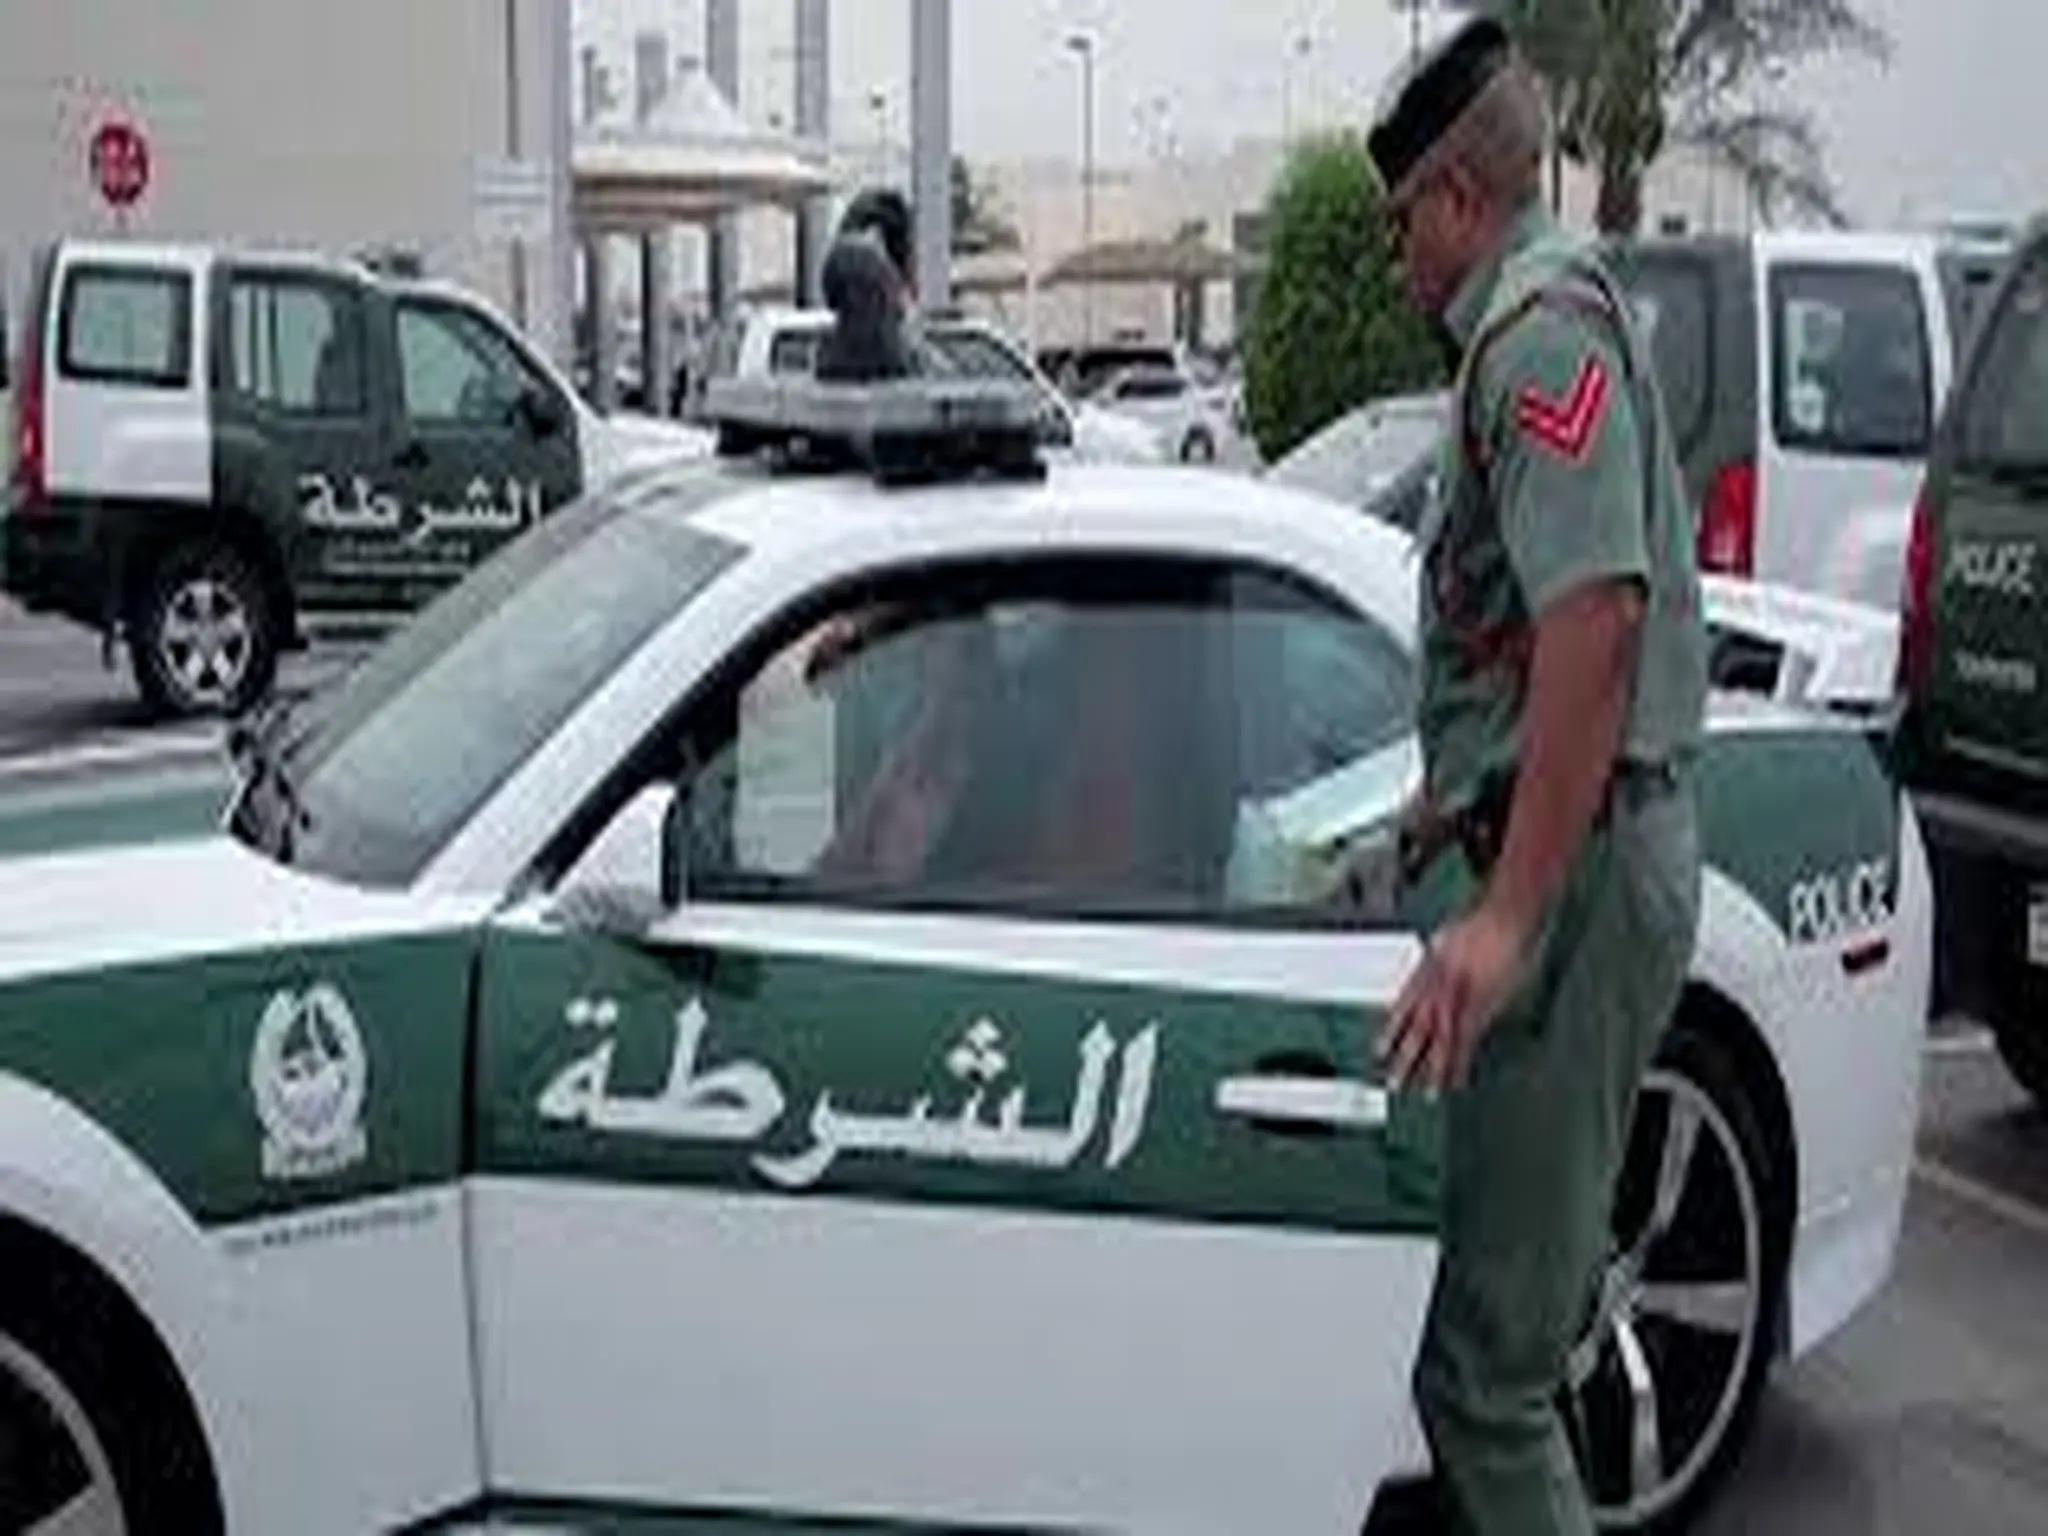 Warning from Abu Dhabi Police: "1,000 dirhams" fine in this case